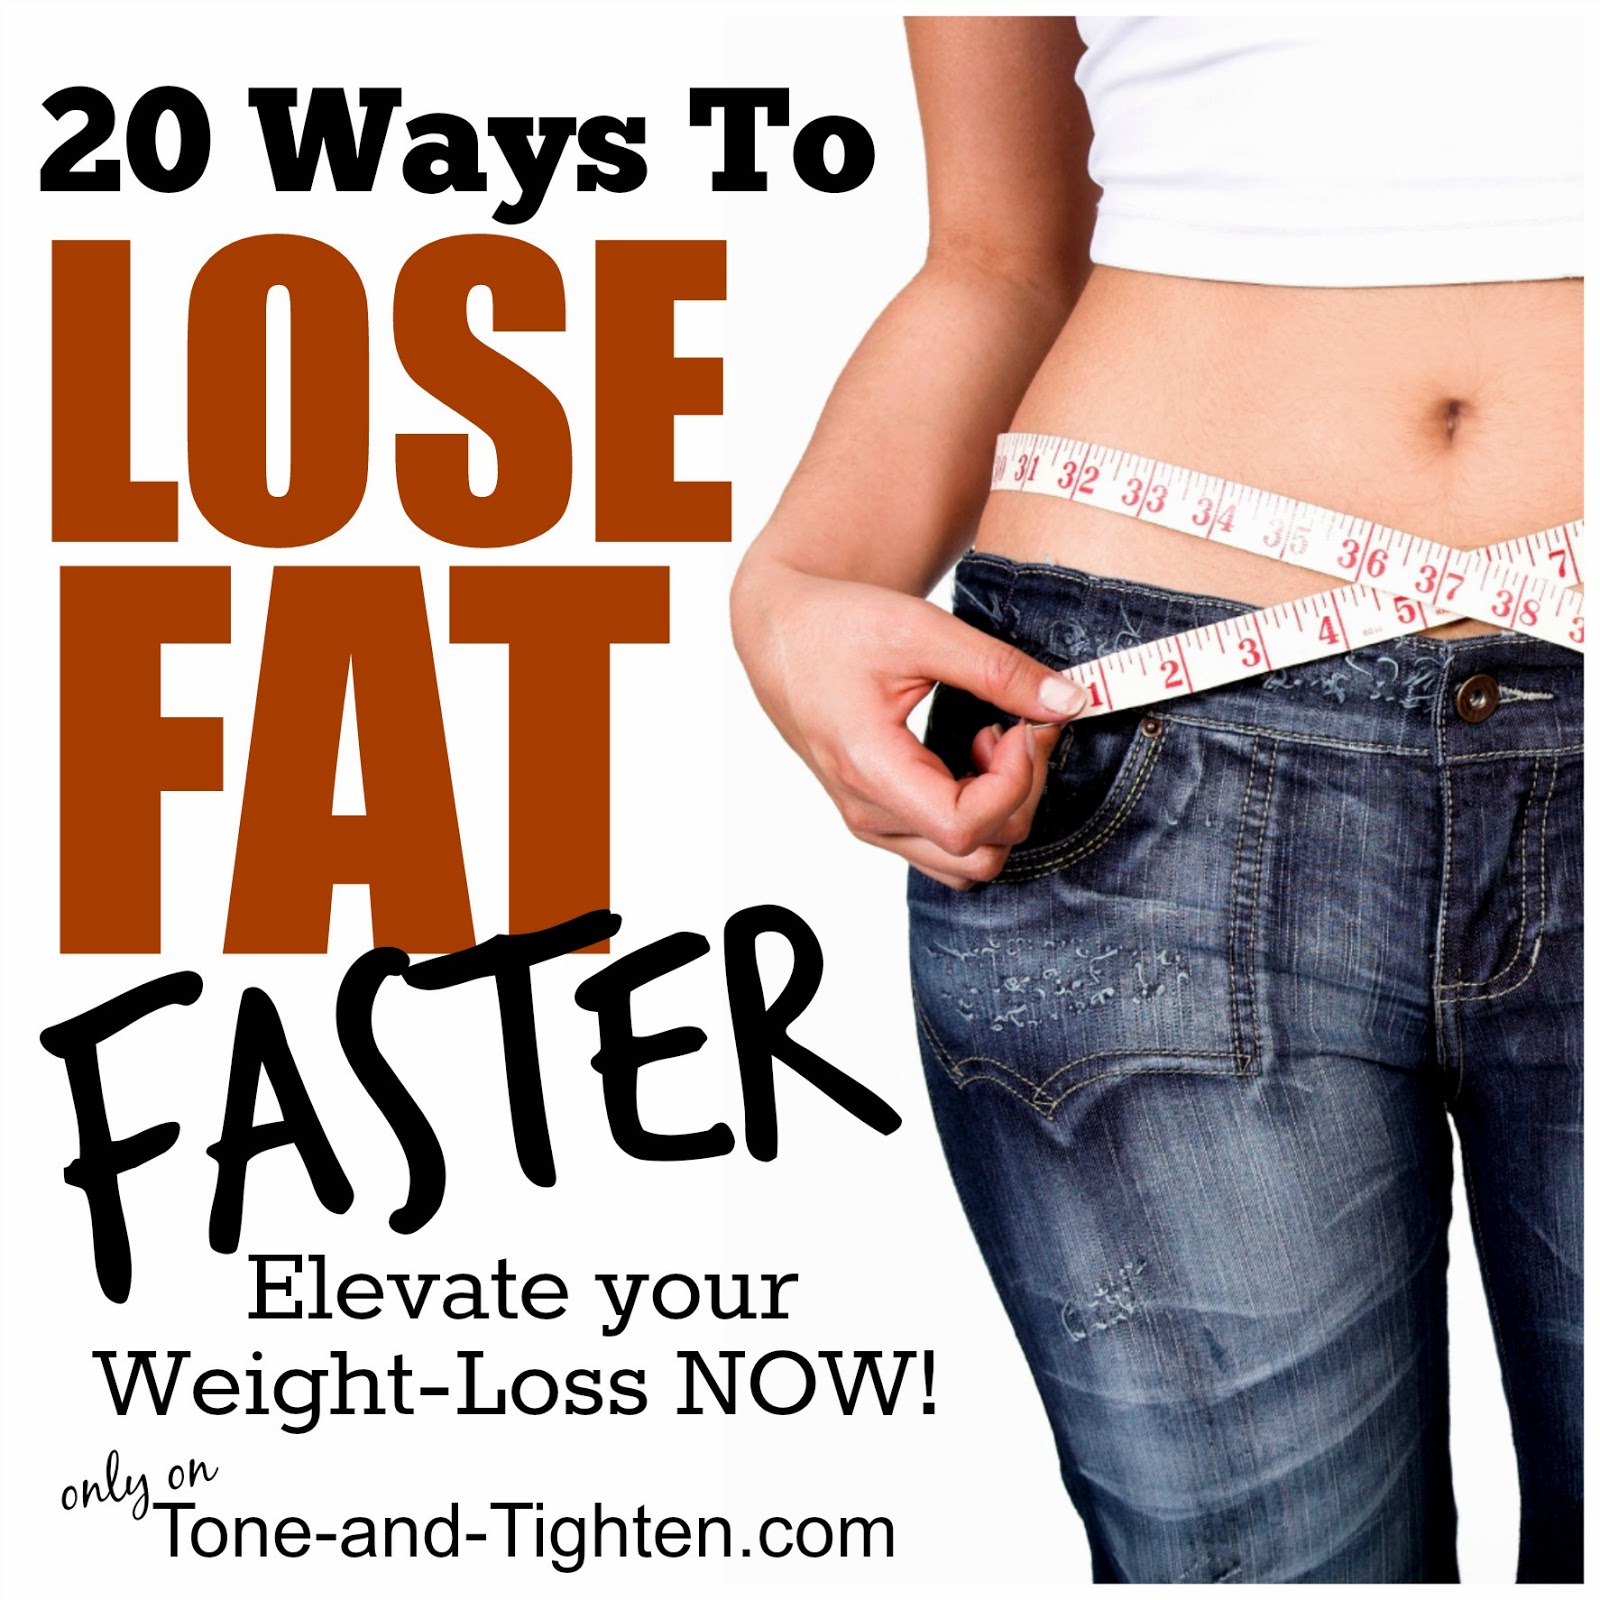 20 Ways To Lose Fat FASTER – Part 2